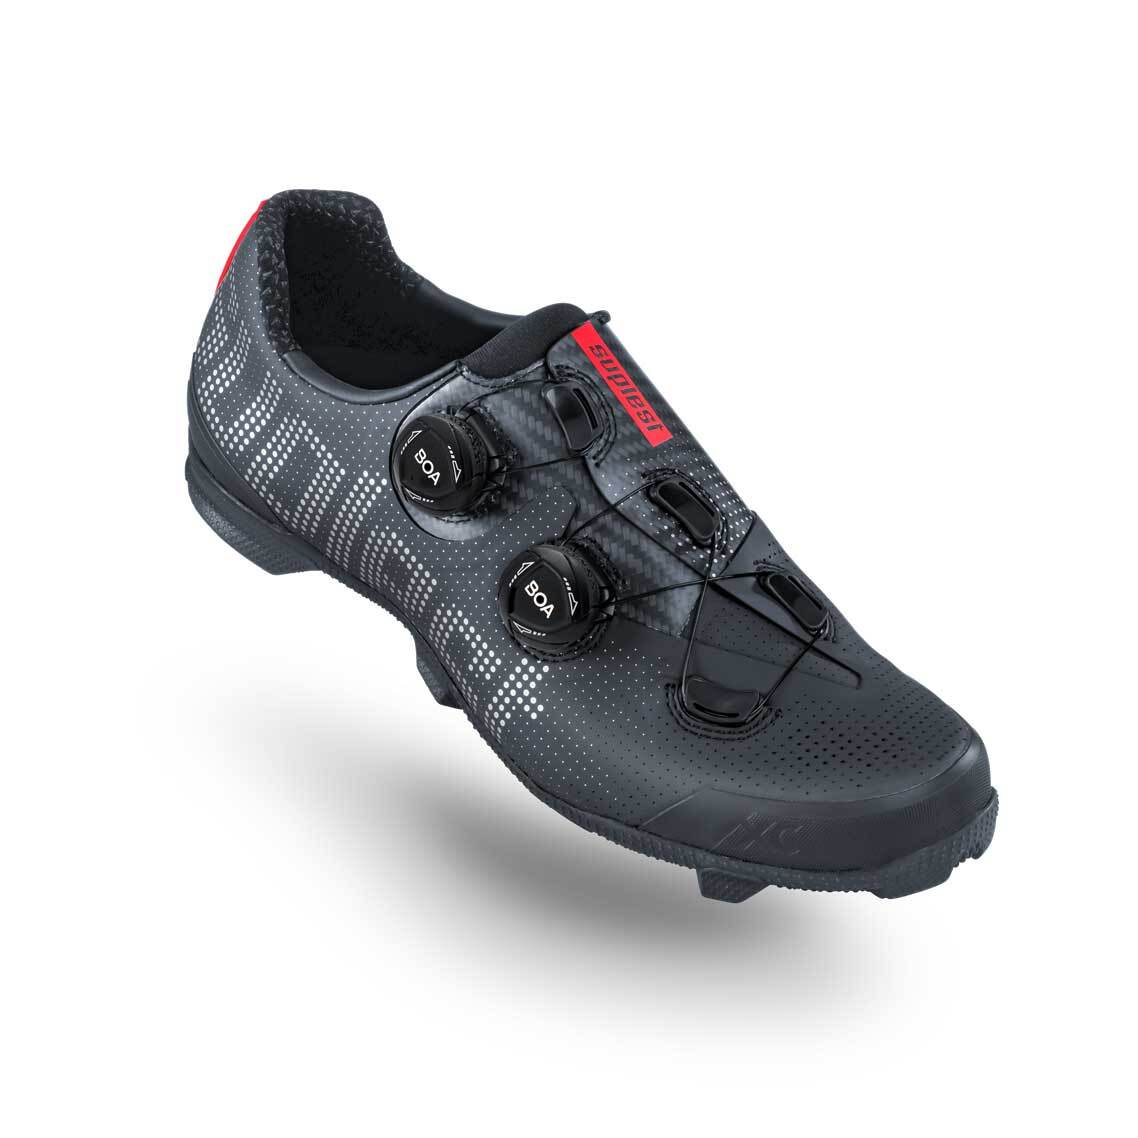 Download 2020 Suplest Edge+ Cross Country Pro Cycling Shoes | XC ...